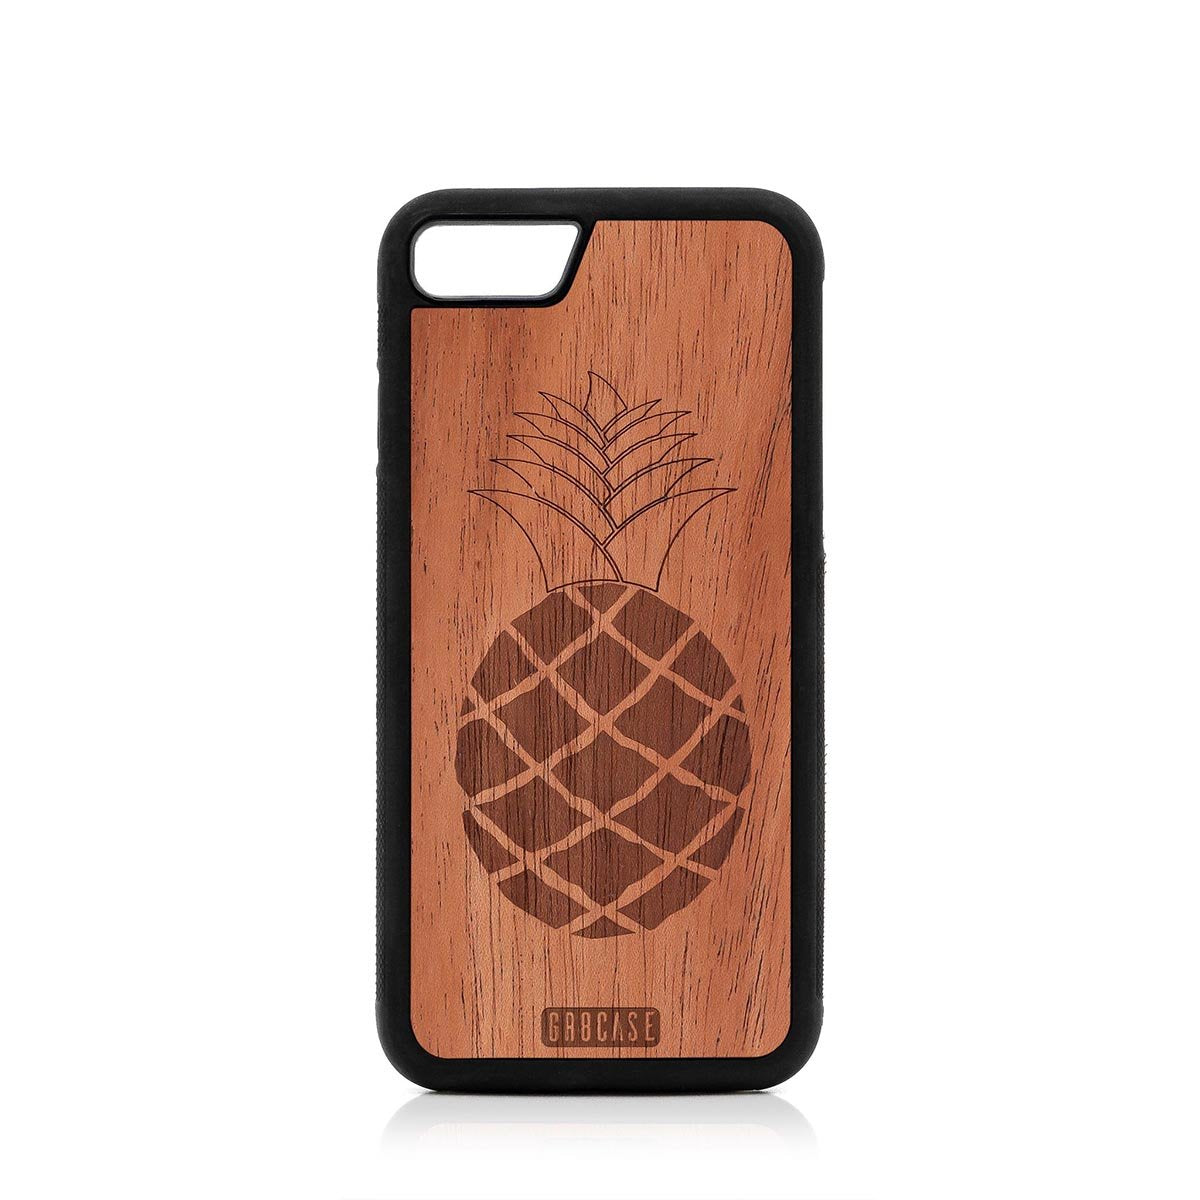 Pineapple Design Wood Case For iPhone SE 2020 by GR8CASE